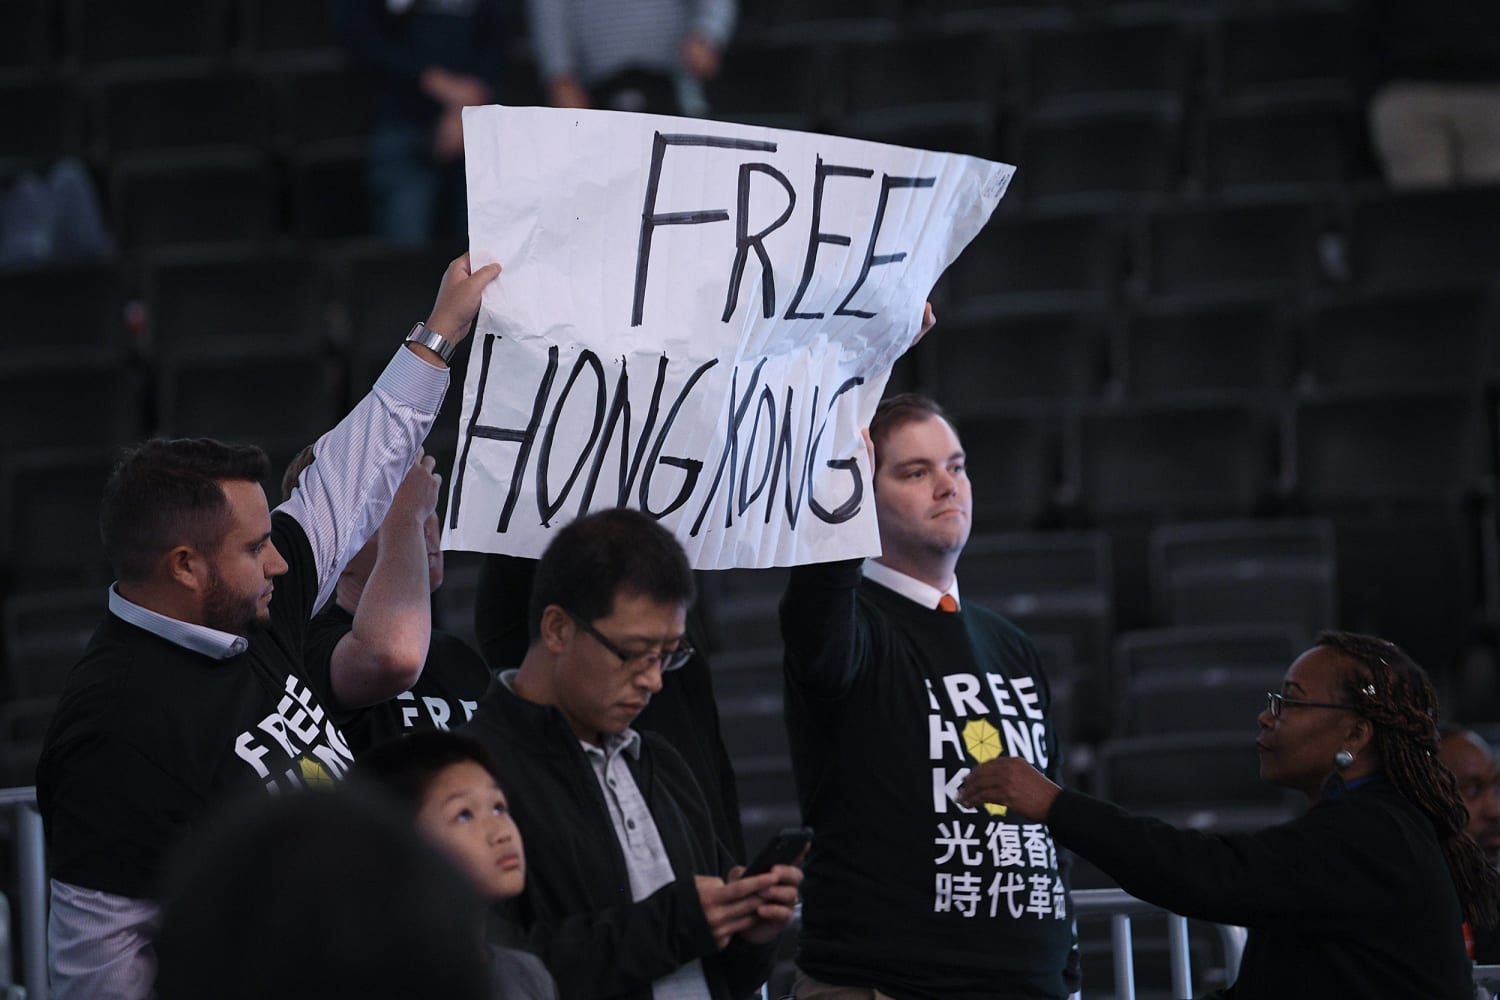 Free Hong Kong signs confiscated at Wizards basketball game